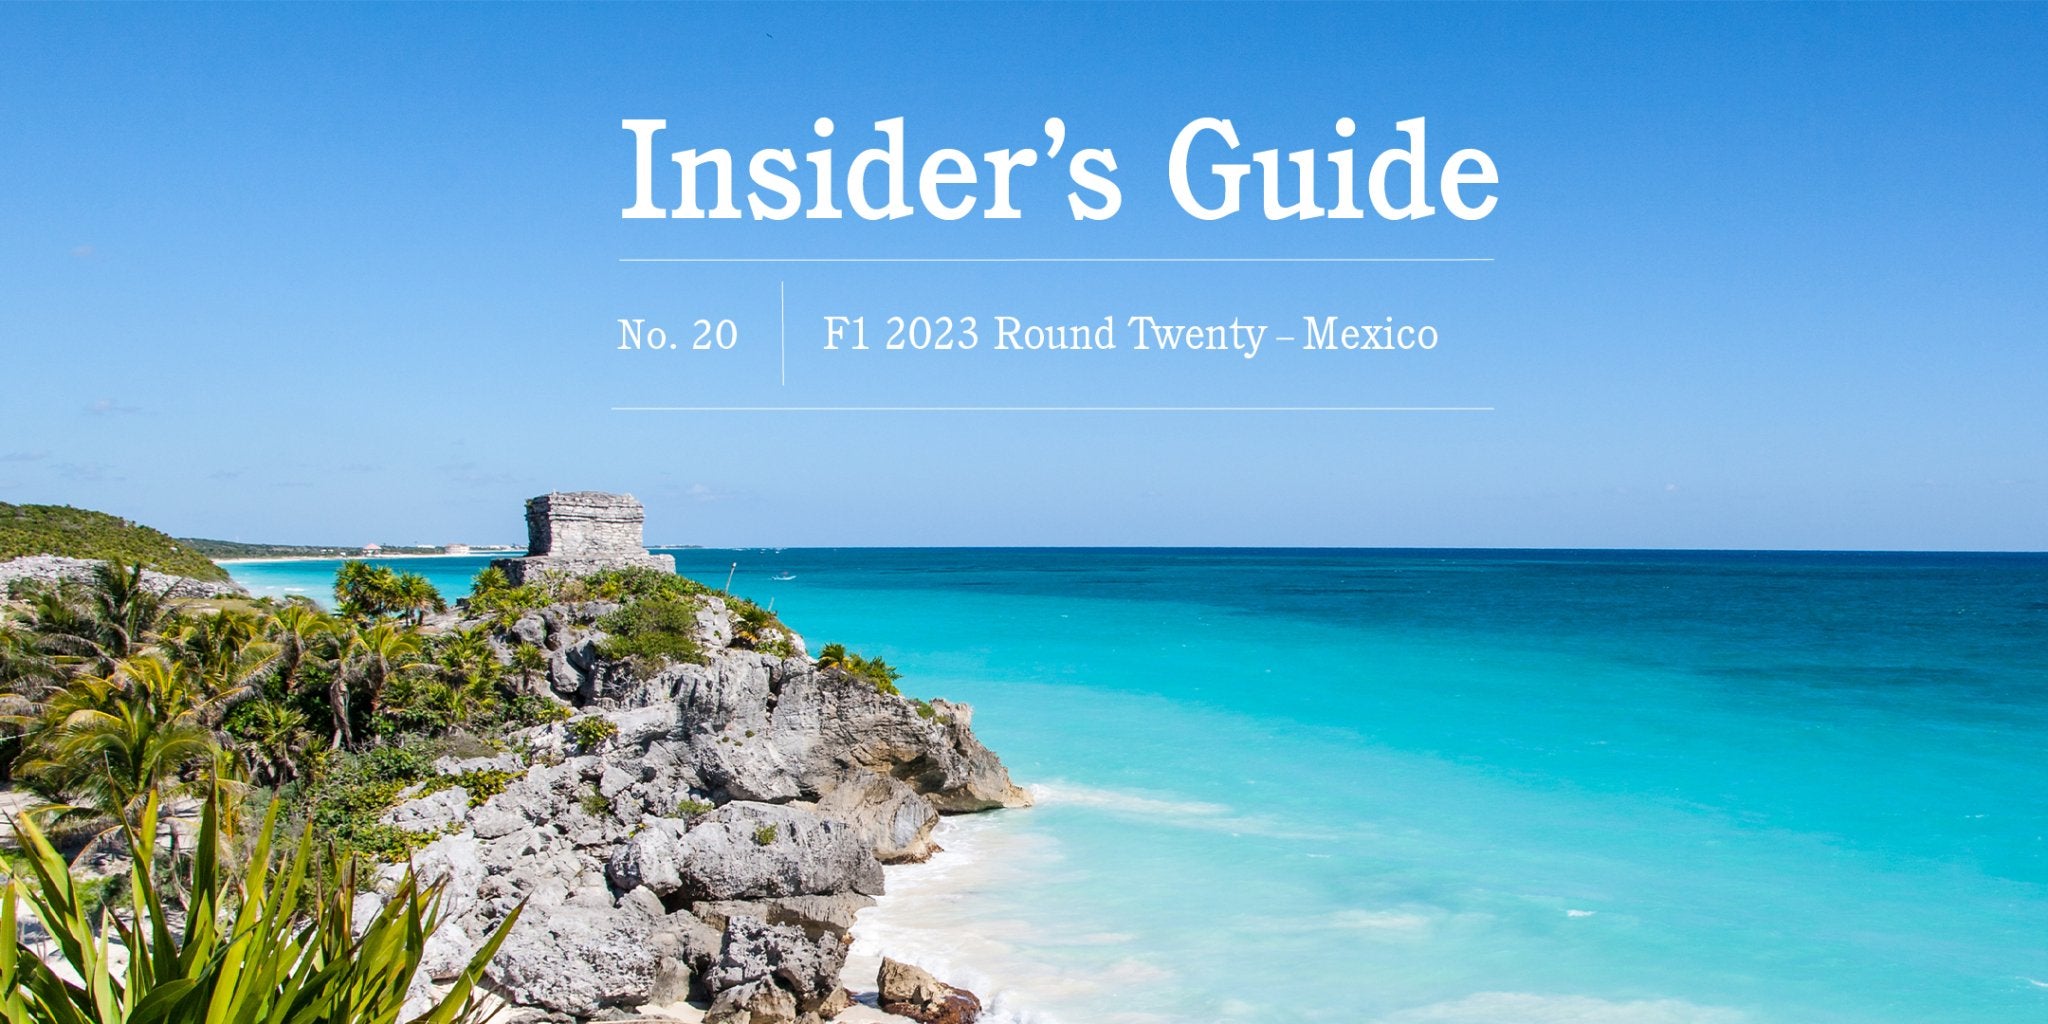 F1 2023 Insider’s Guide No. 20 – Mexico - Globe-Trotter Staging